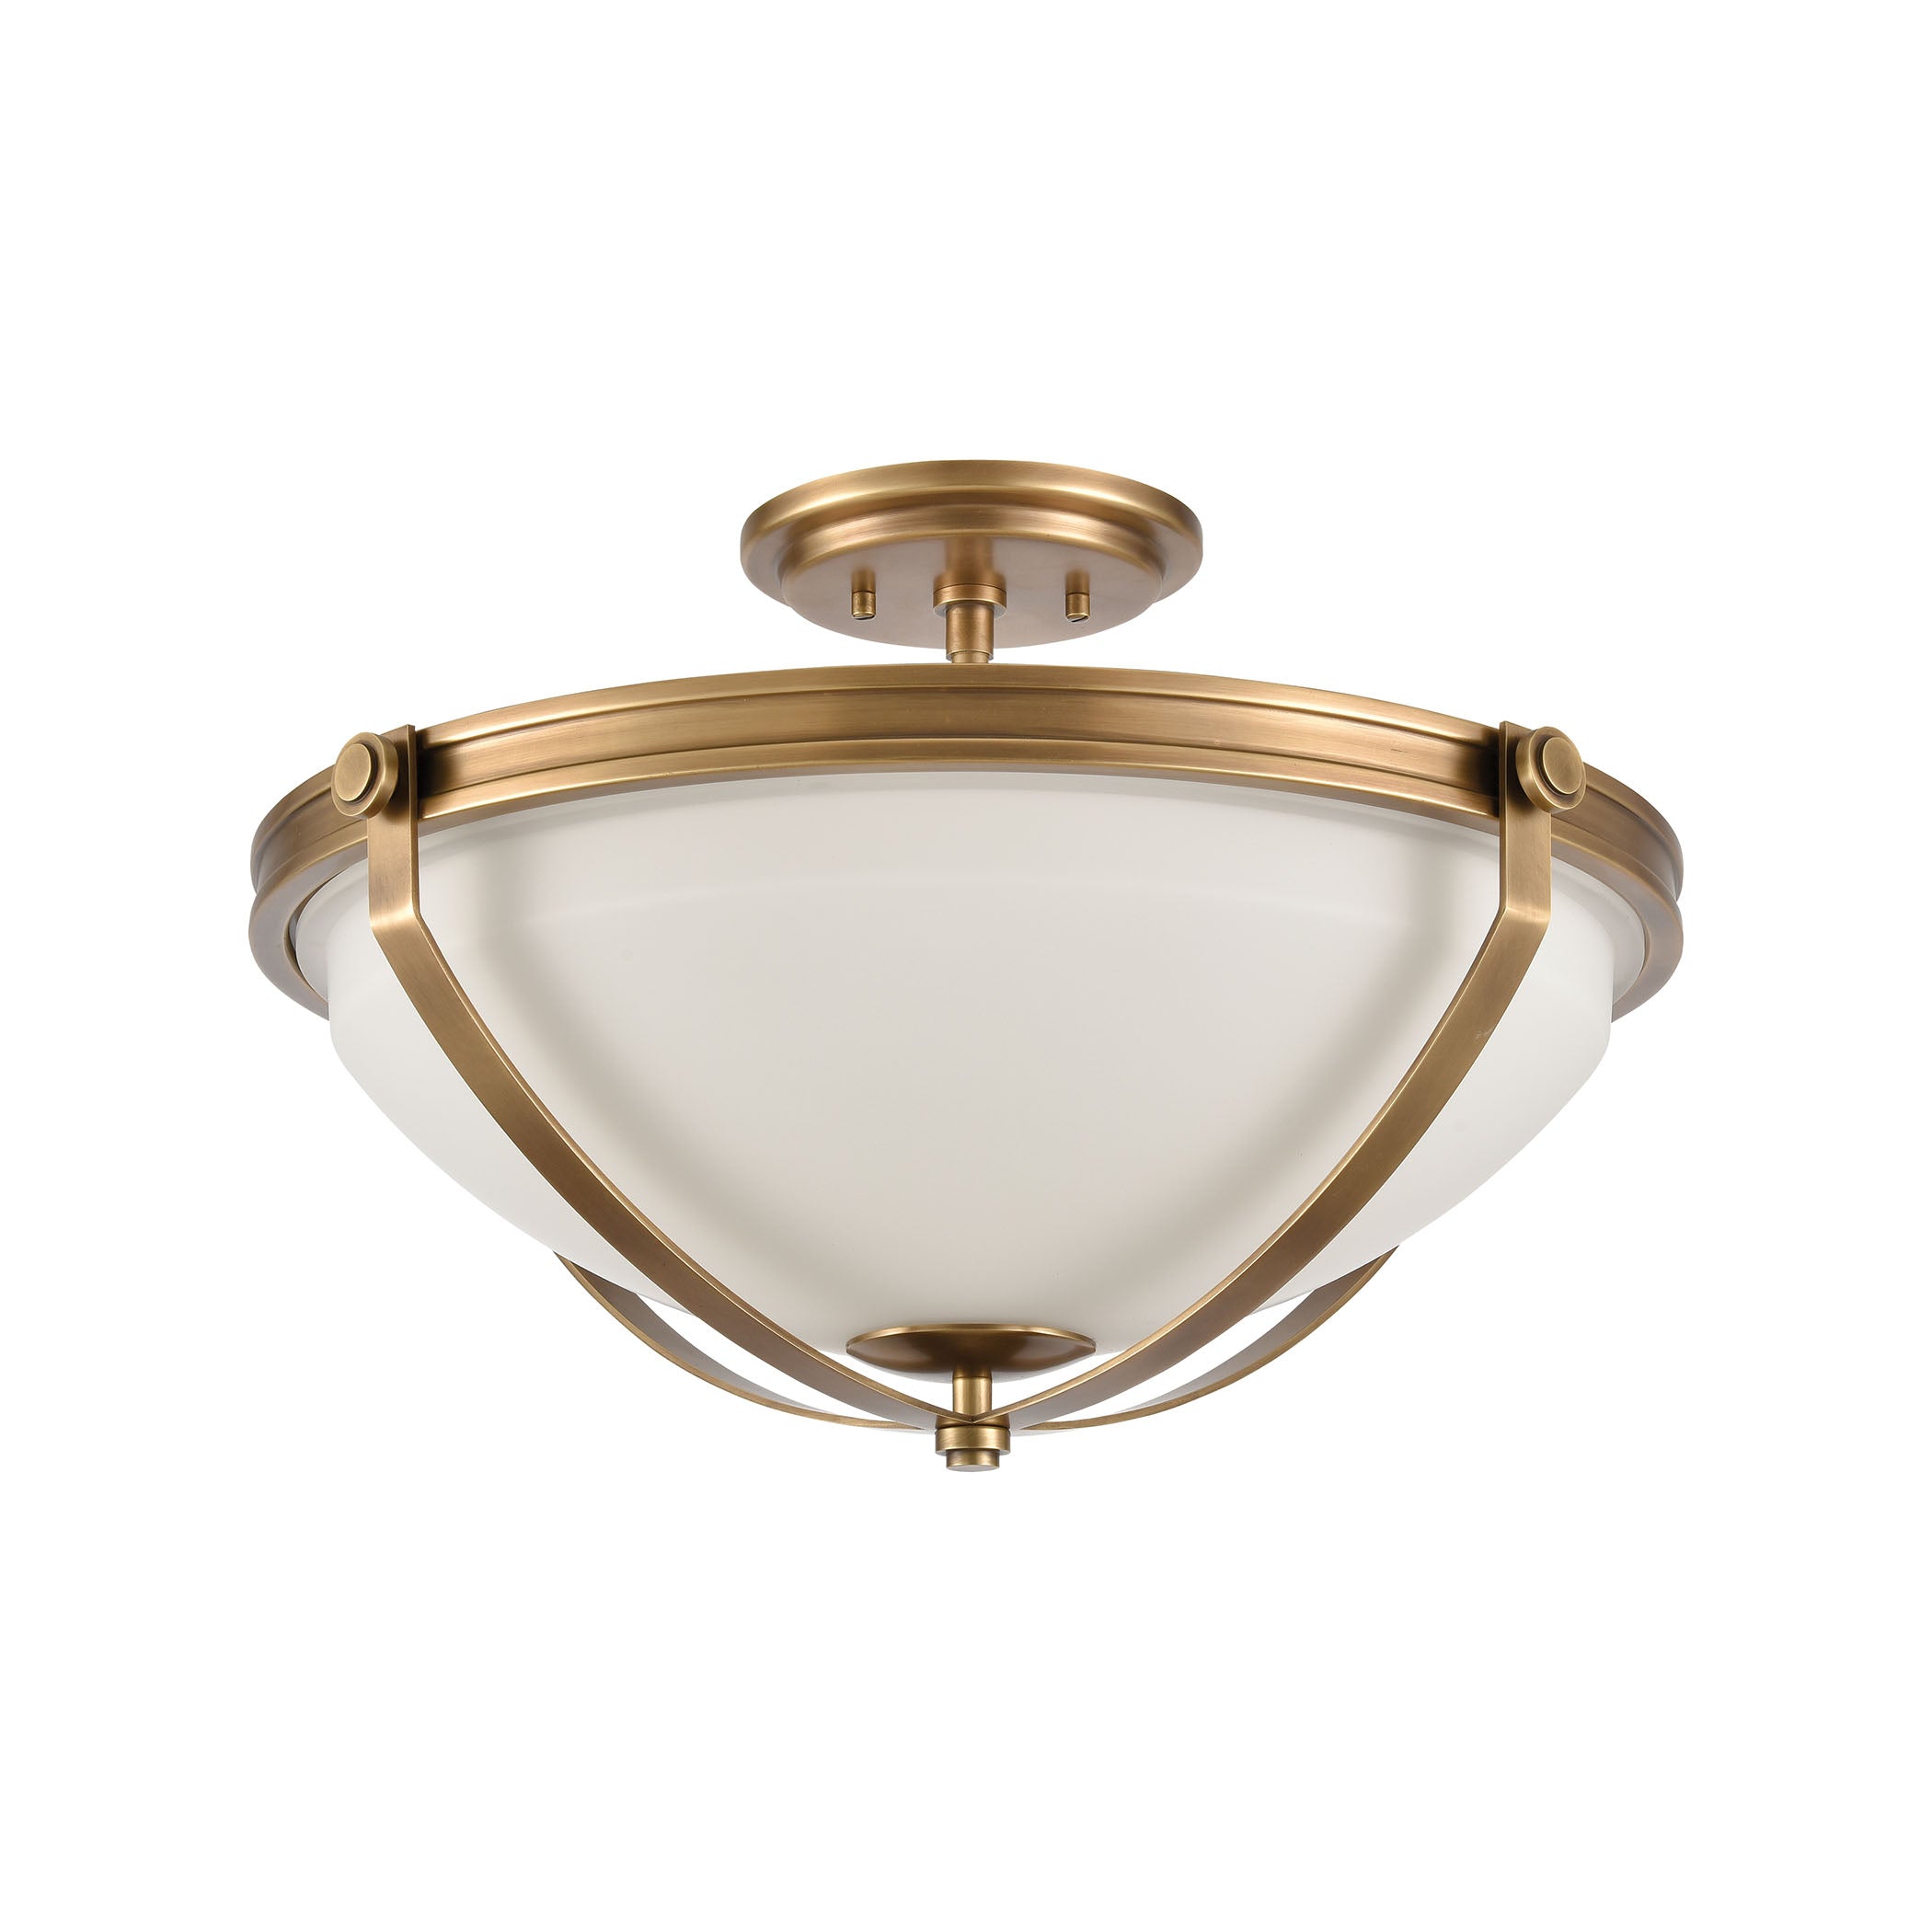 ELK Lighting 89115/3 Connelly 3-Light Semi Flush in Natural Brass with Frosted Glass